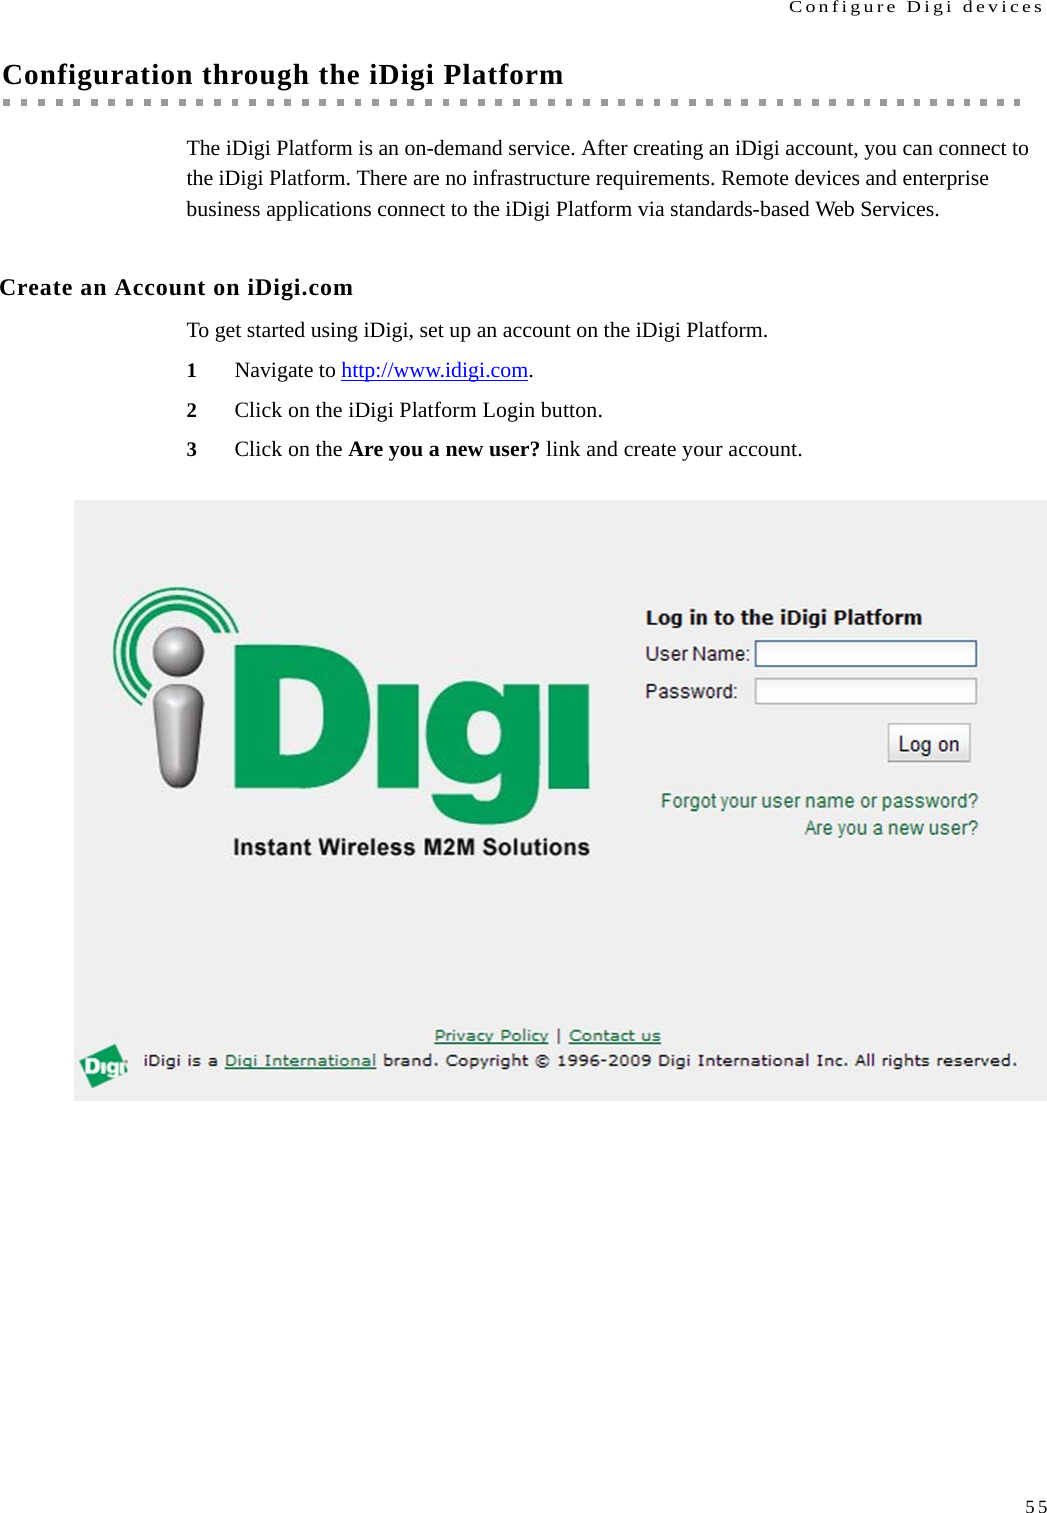 Configure Digi devices55Configuration through the iDigi PlatformThe iDigi Platform is an on-demand service. After creating an iDigi account, you can connect to the iDigi Platform. There are no infrastructure requirements. Remote devices and enterprise business applications connect to the iDigi Platform via standards-based Web Services.Create an Account on iDigi.comTo get started using iDigi, set up an account on the iDigi Platform.1Navigate to http://www.idigi.com.2Click on the iDigi Platform Login button.3Click on the Are you a new user? link and create your account.